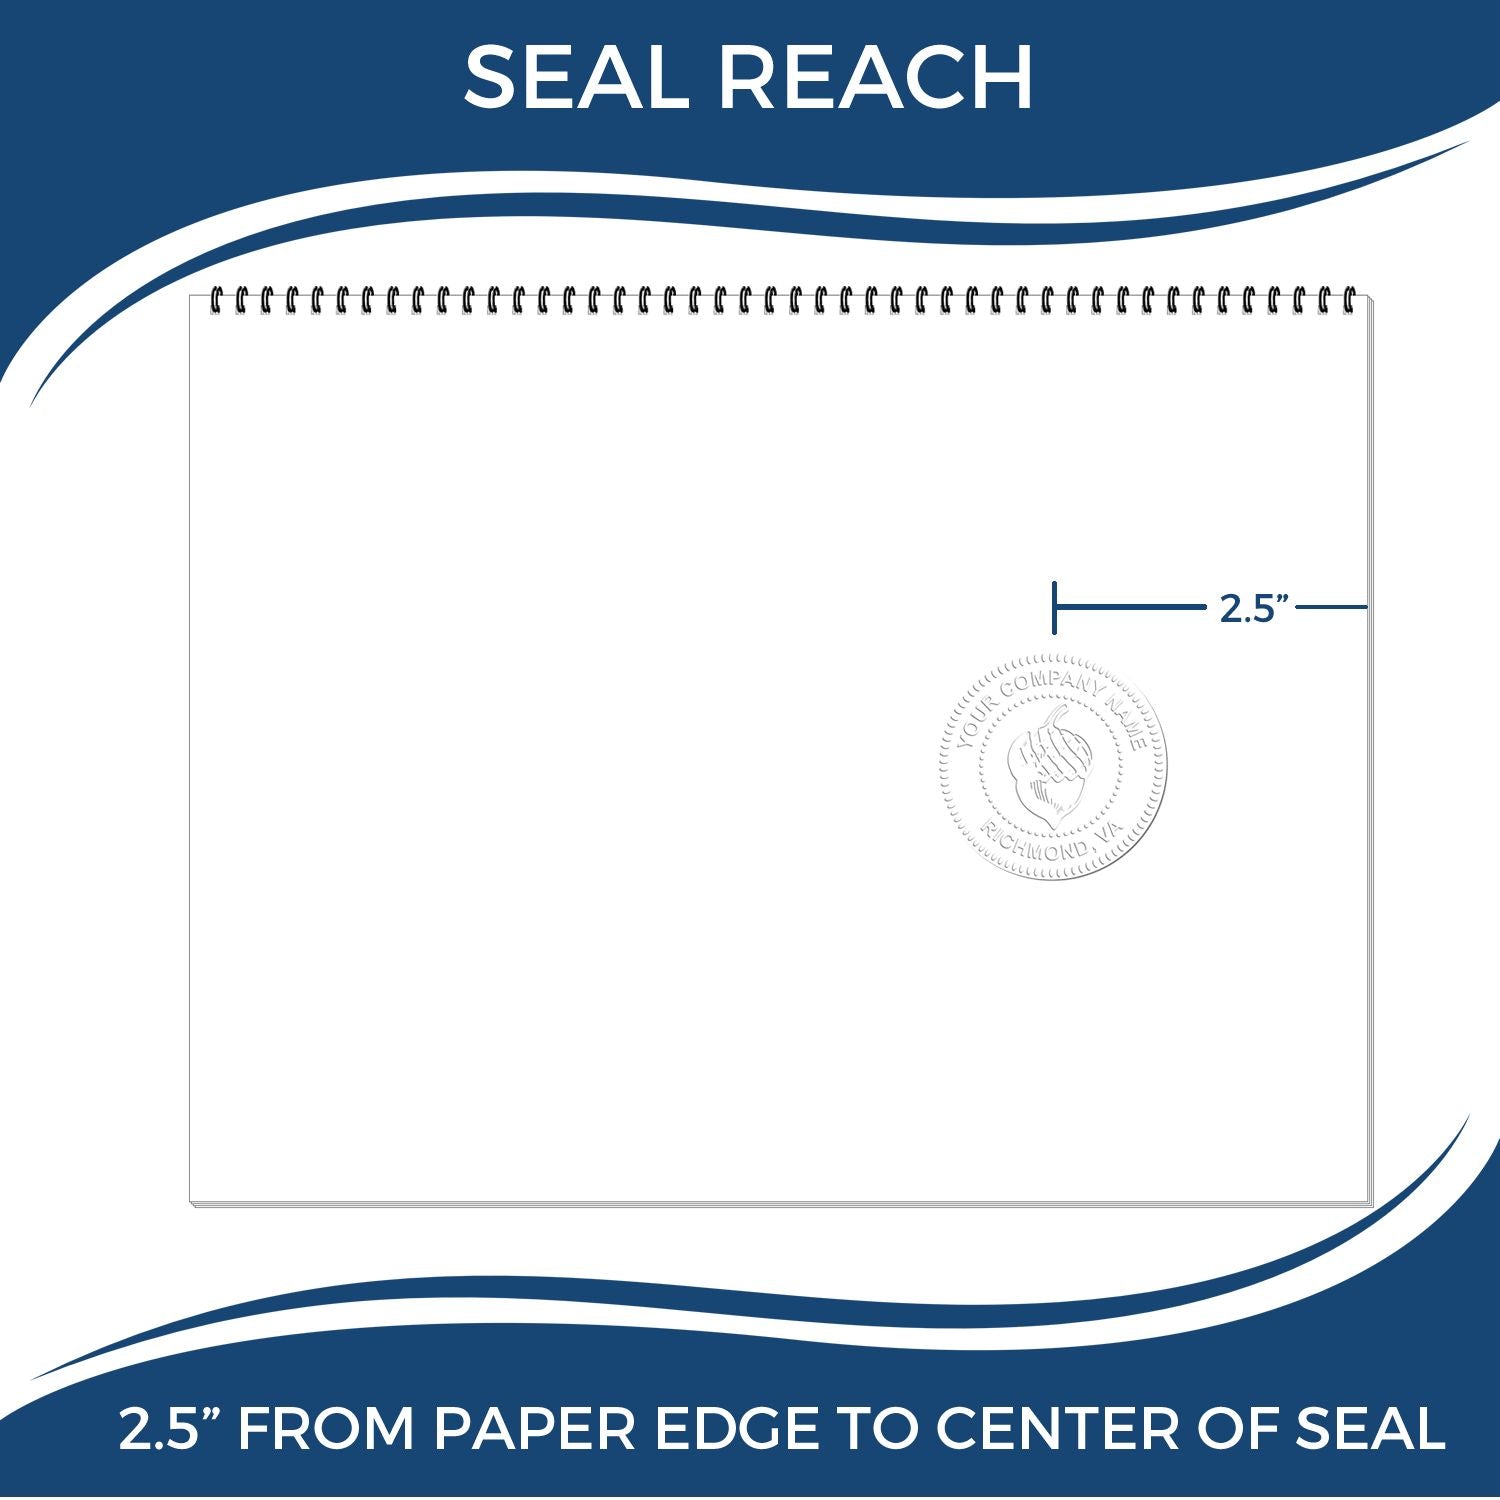 An infographic showing the seal reach which is represented by a ruler and a miniature seal image of the State of Iowa Long Reach Architectural Embossing Seal